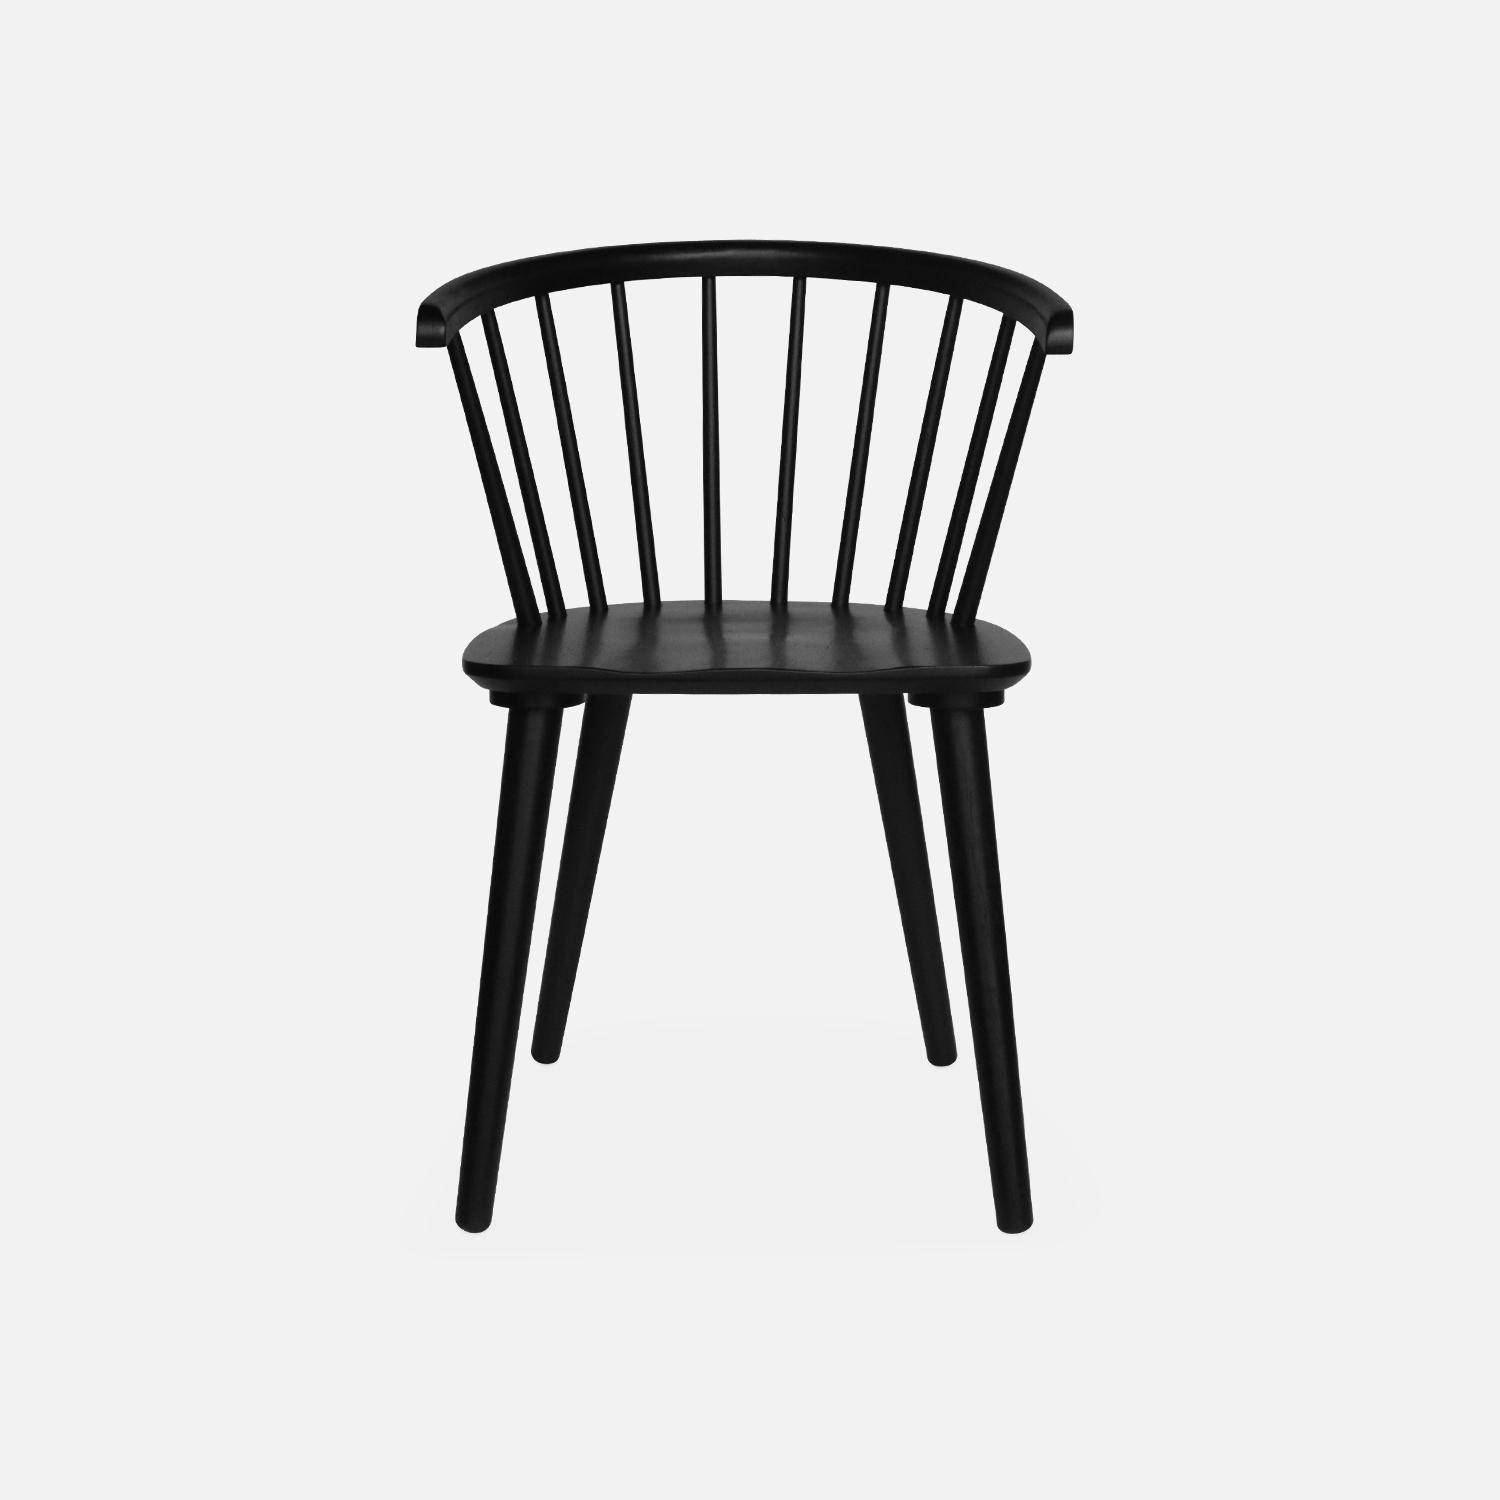 Pair of  Wood and Plywood Spindle Chairs, black, L53 x W47.5 x H76cm  Photo5